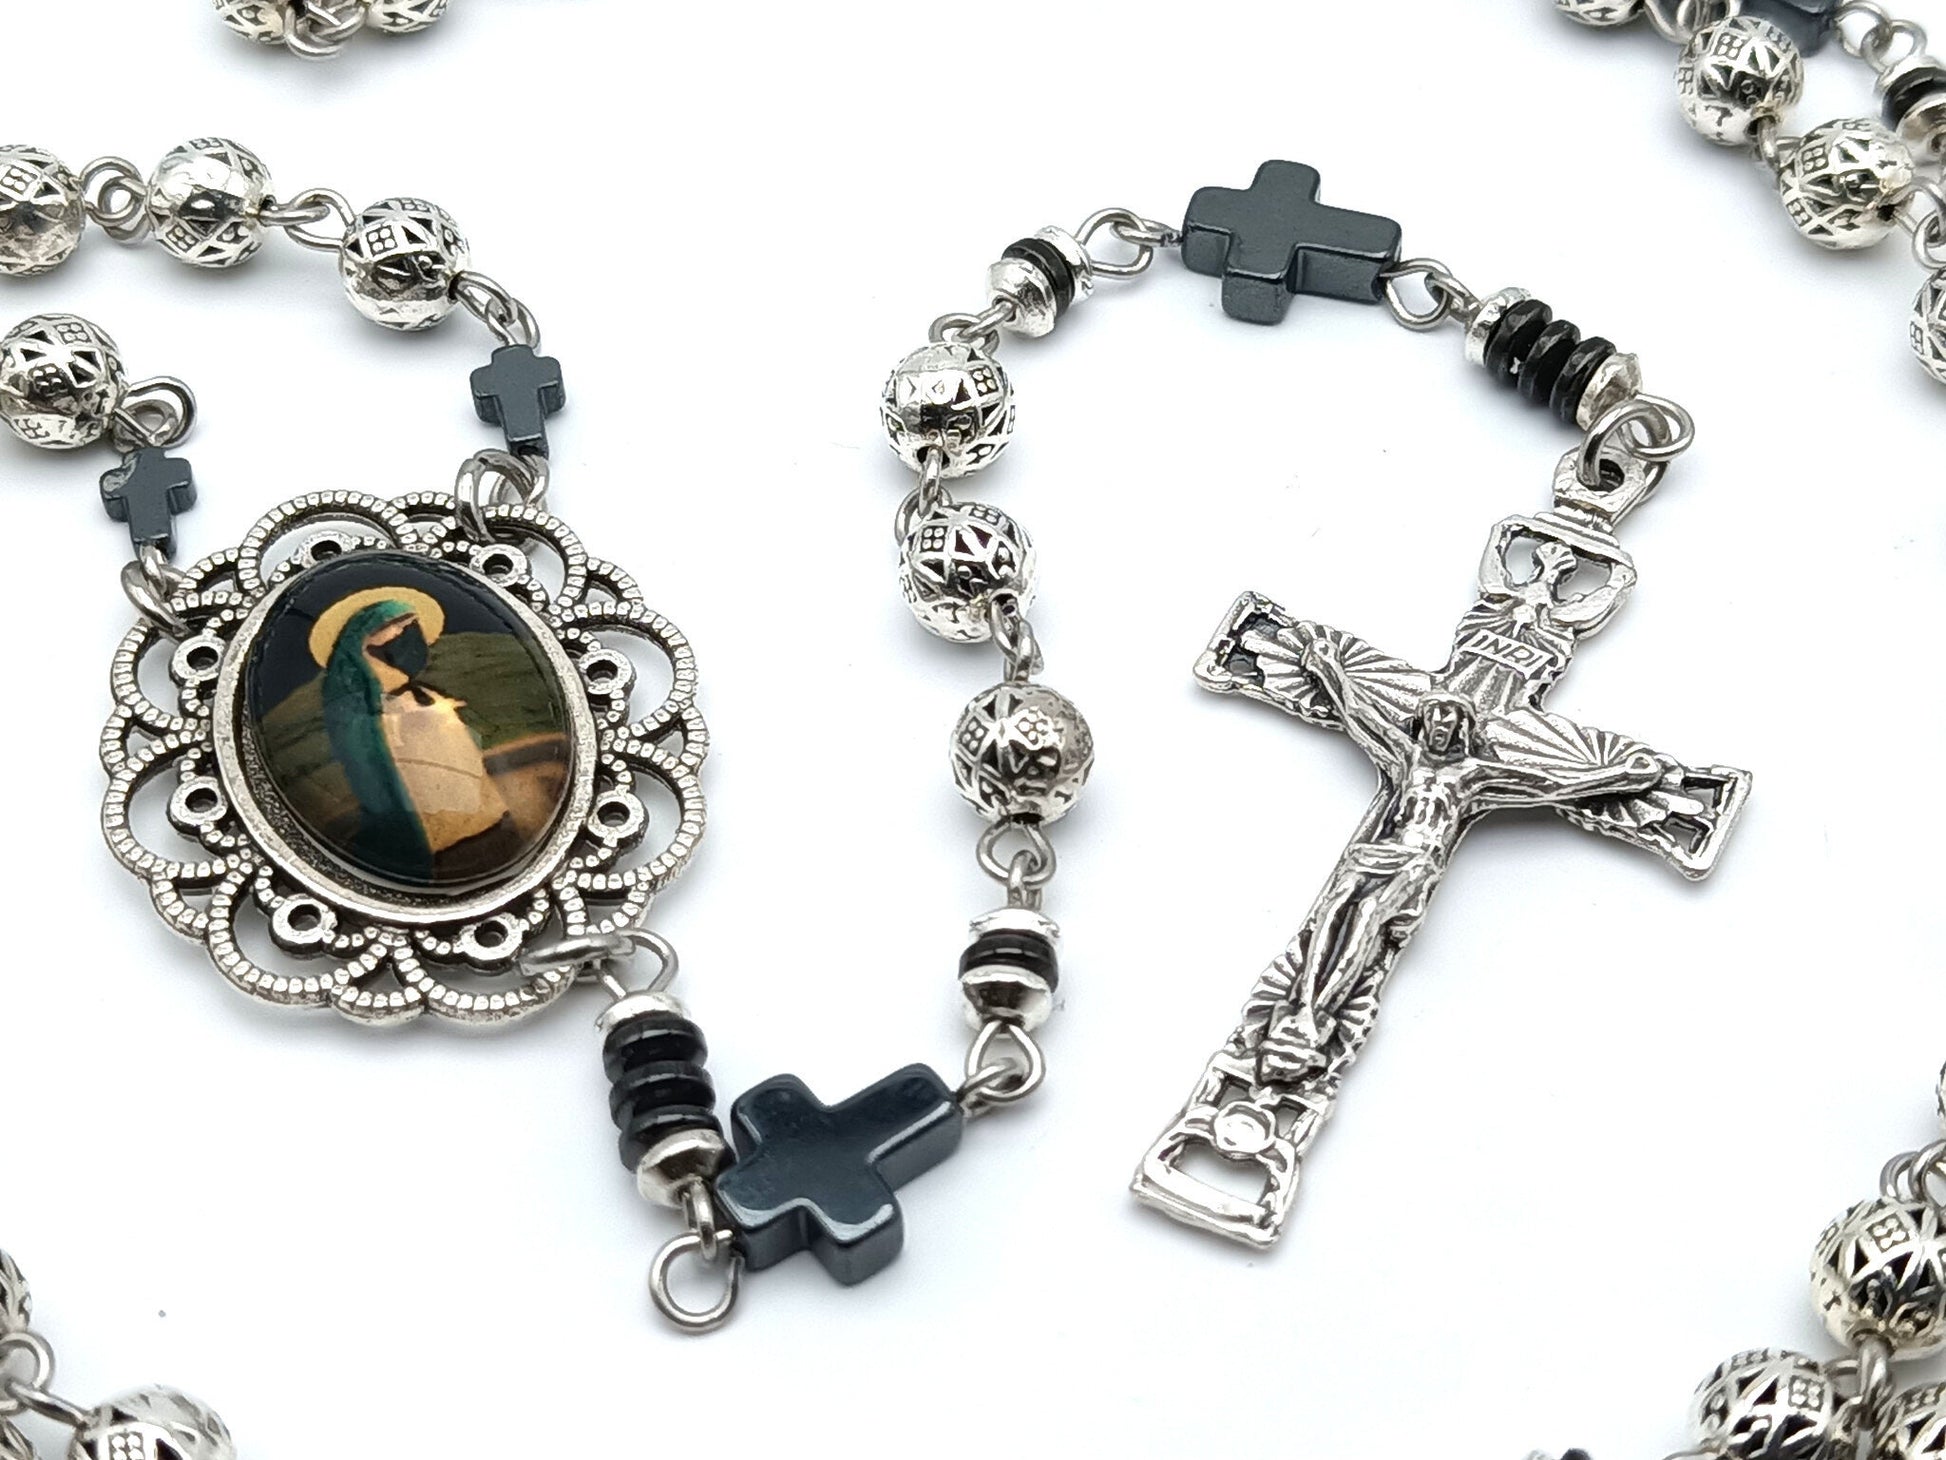 Blessed Virgin Mary unique rosary beads in Tibetan silver with hematite pater beads, silver crucifix and centre picture medal.